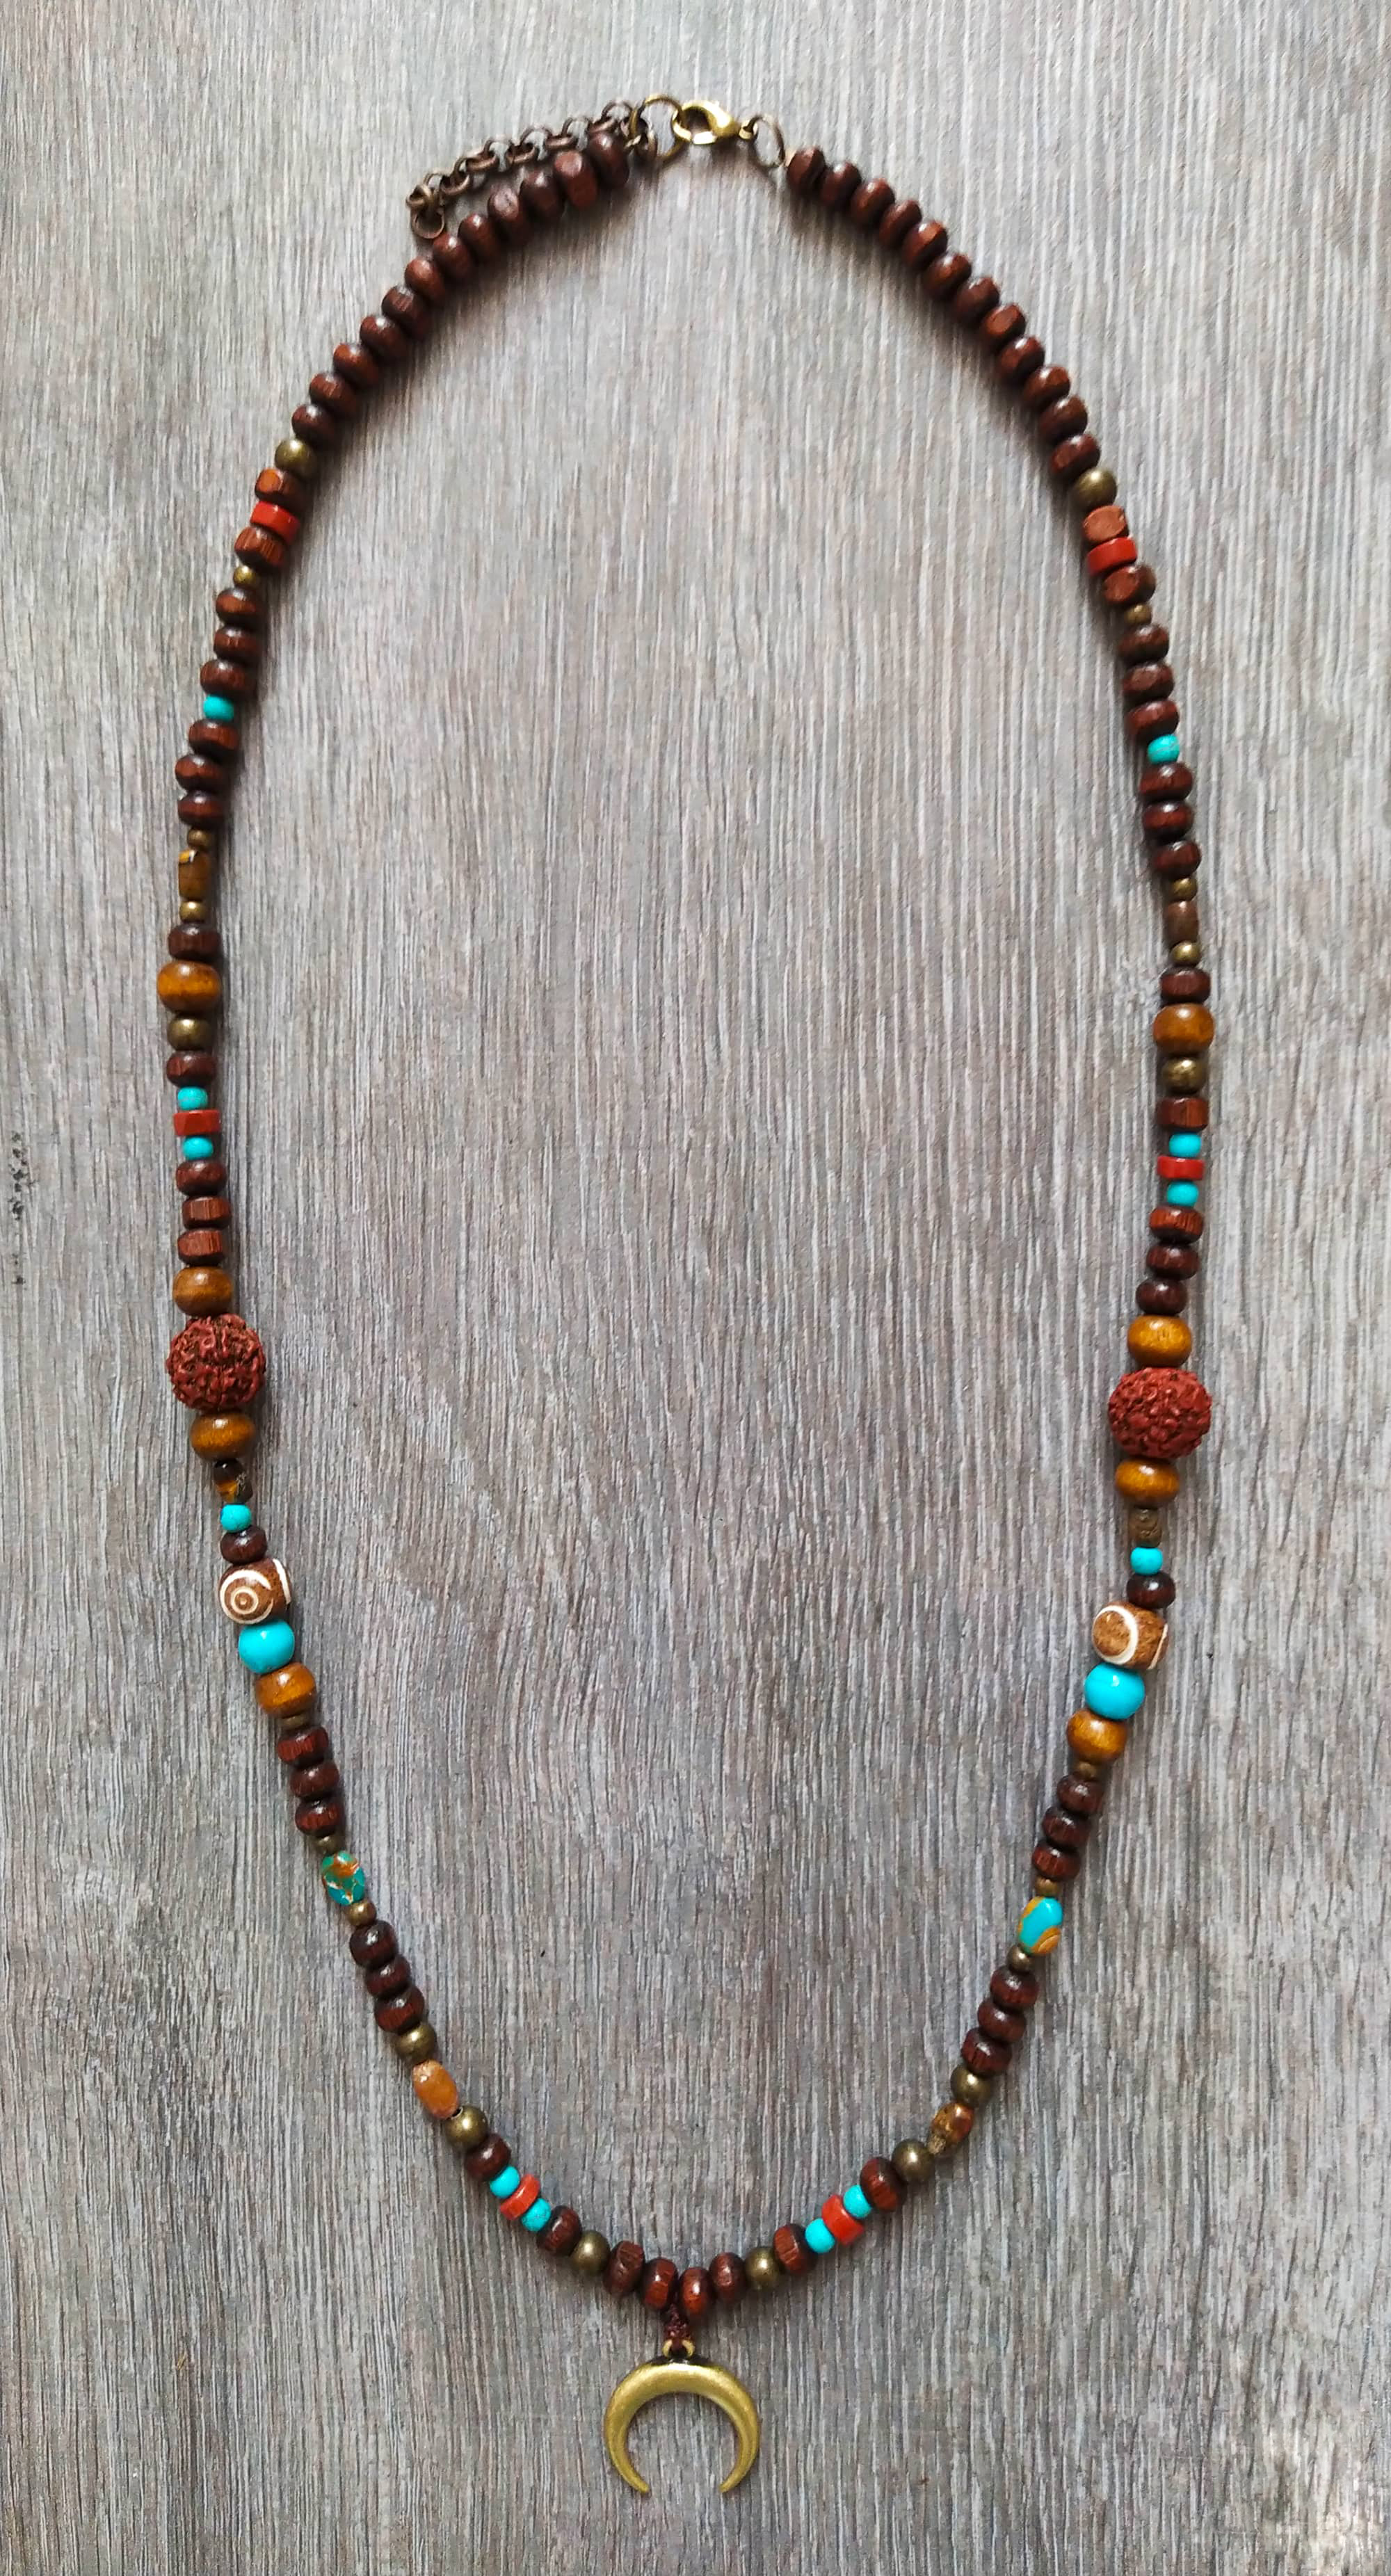 wooden bead and gemstone necklace woth rudraksha and a bronze moon pendant- wander jewellery